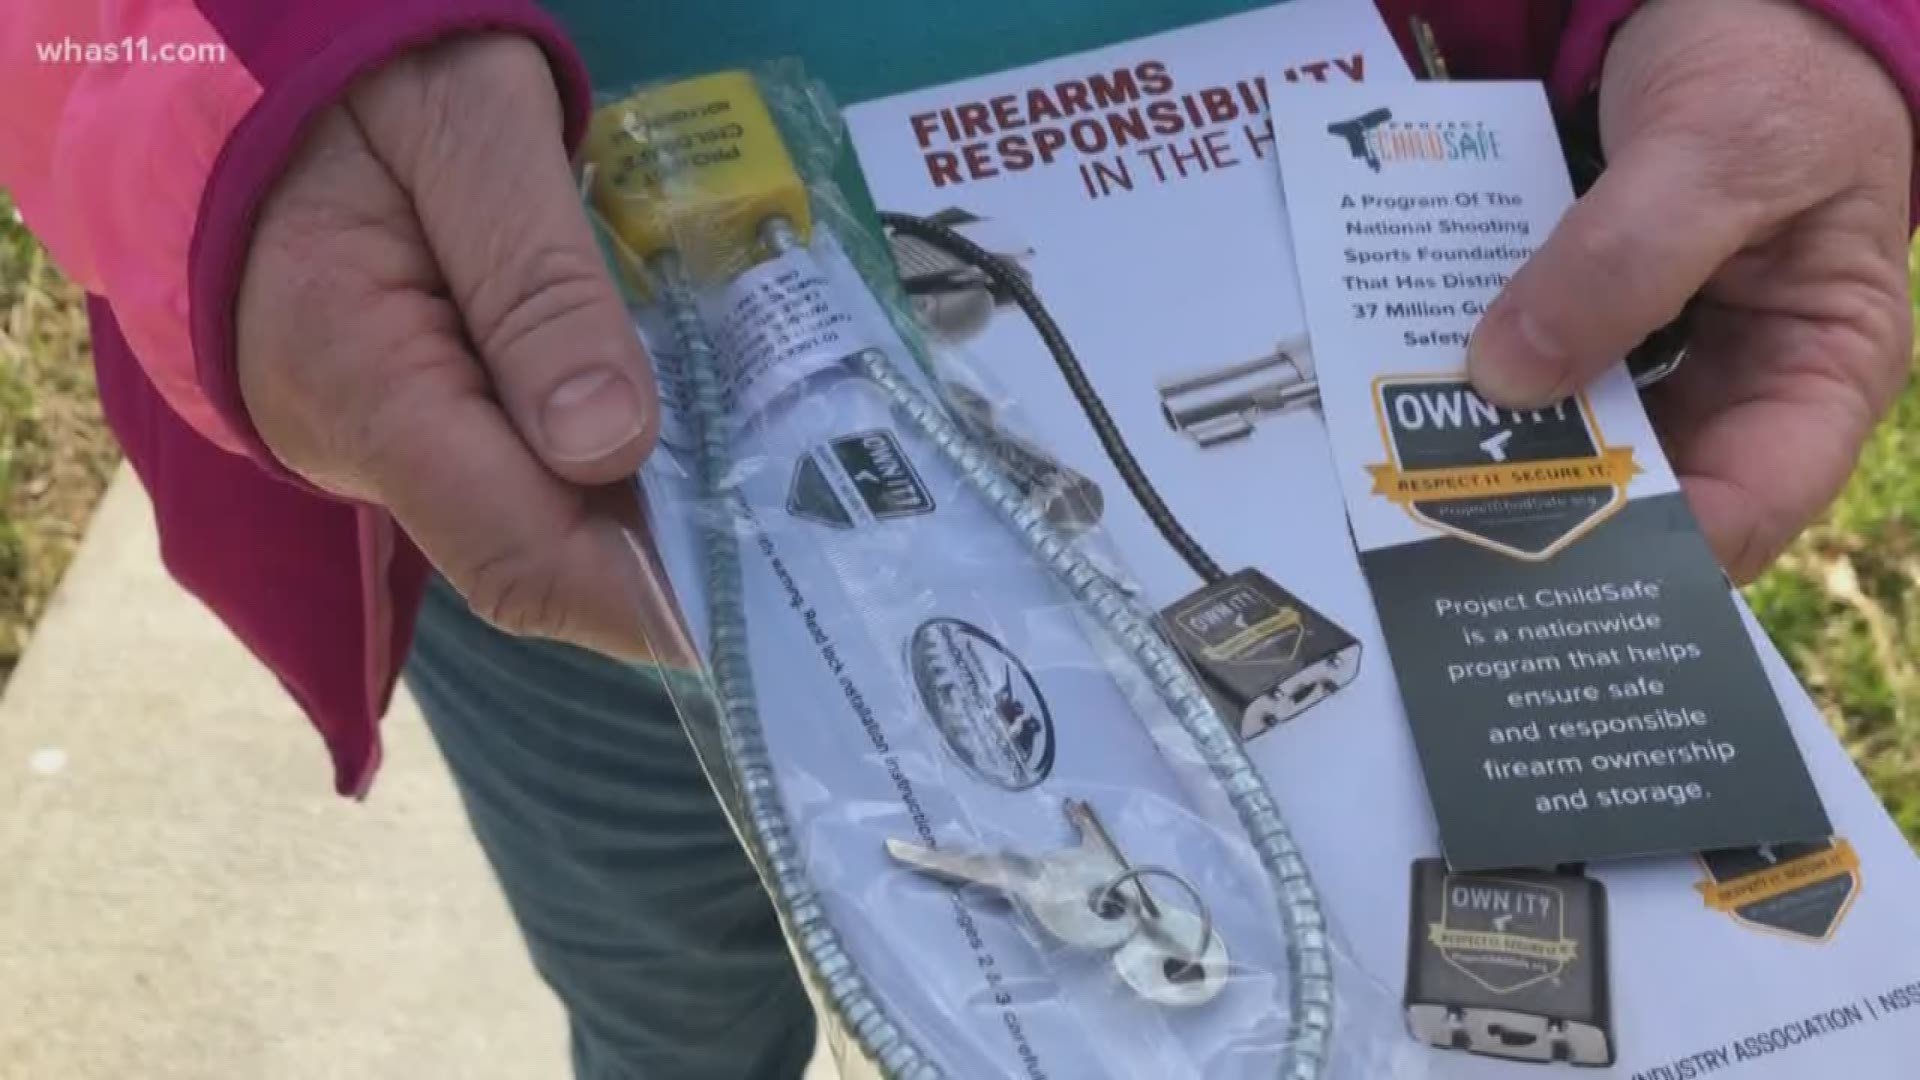 Louisville Metro Police are being proactive in giving free gun locks as part of a national initiative.